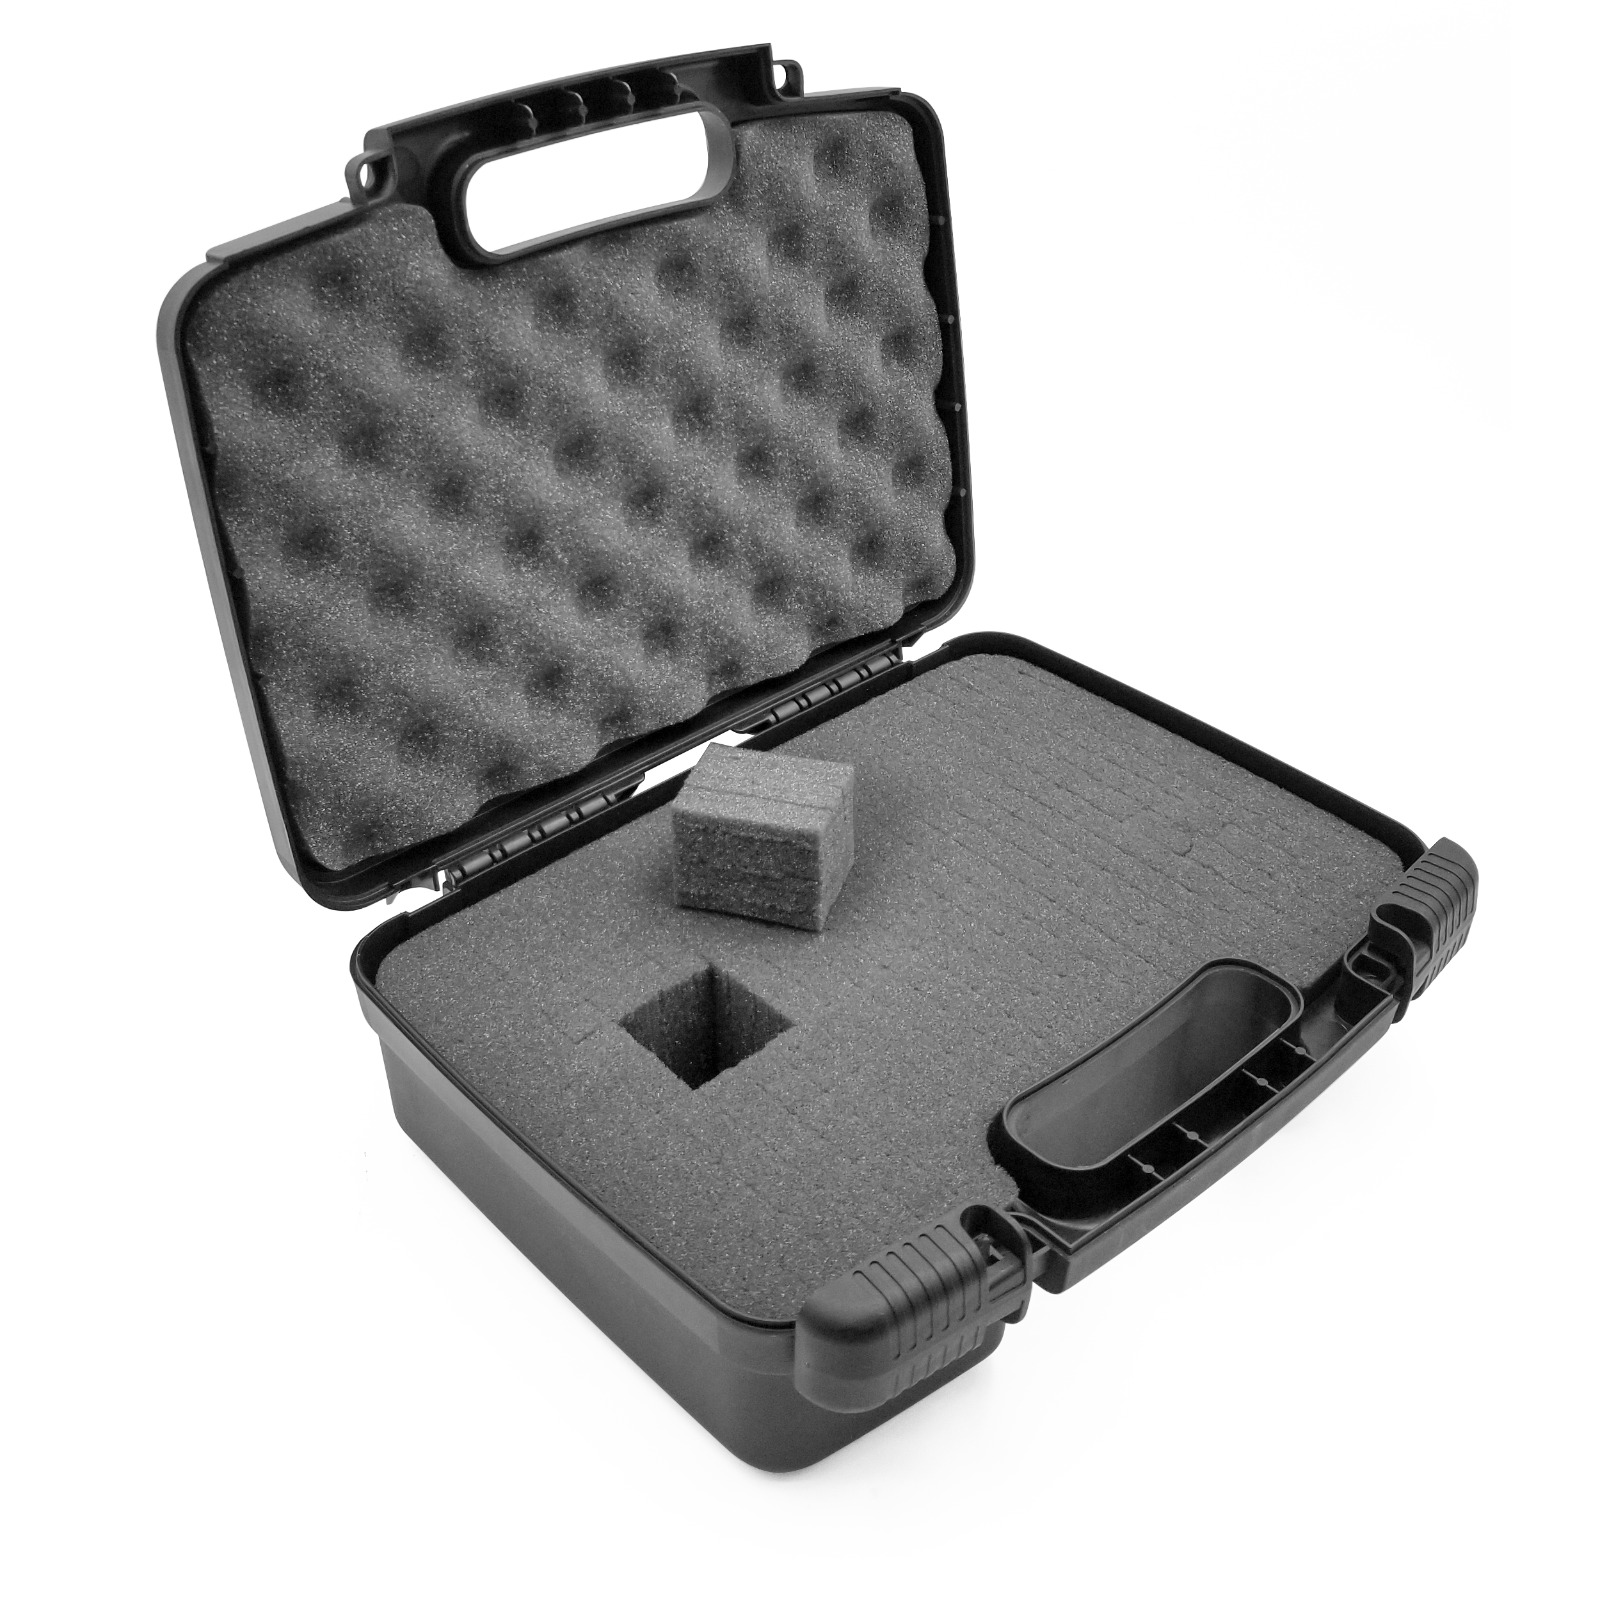 Projector Carrying Case fits Mobile Projectors, Microphones and More - Case Only